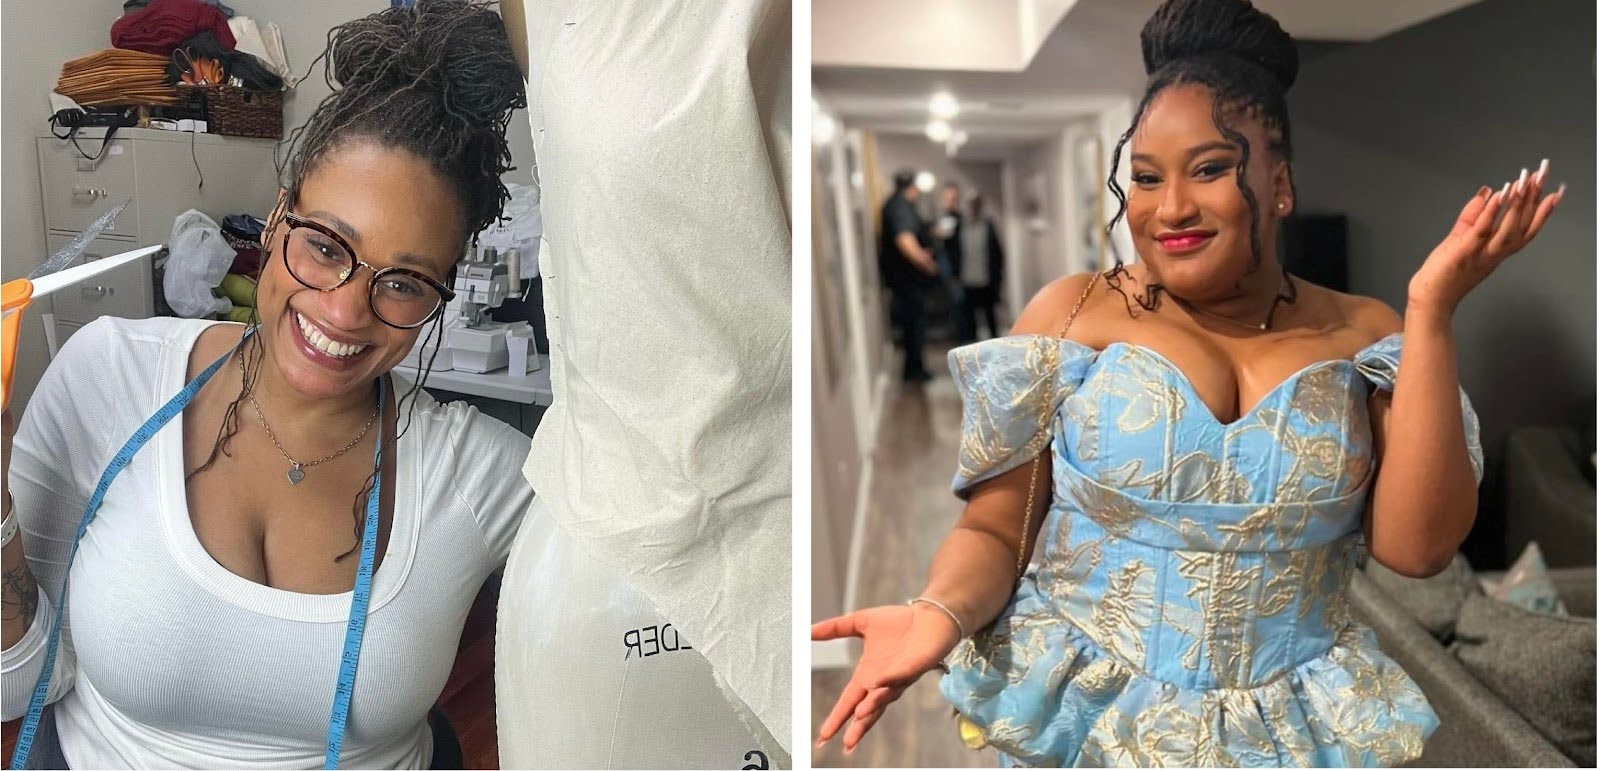 Mom who handmade her daughters' prom dress cried during big reveal